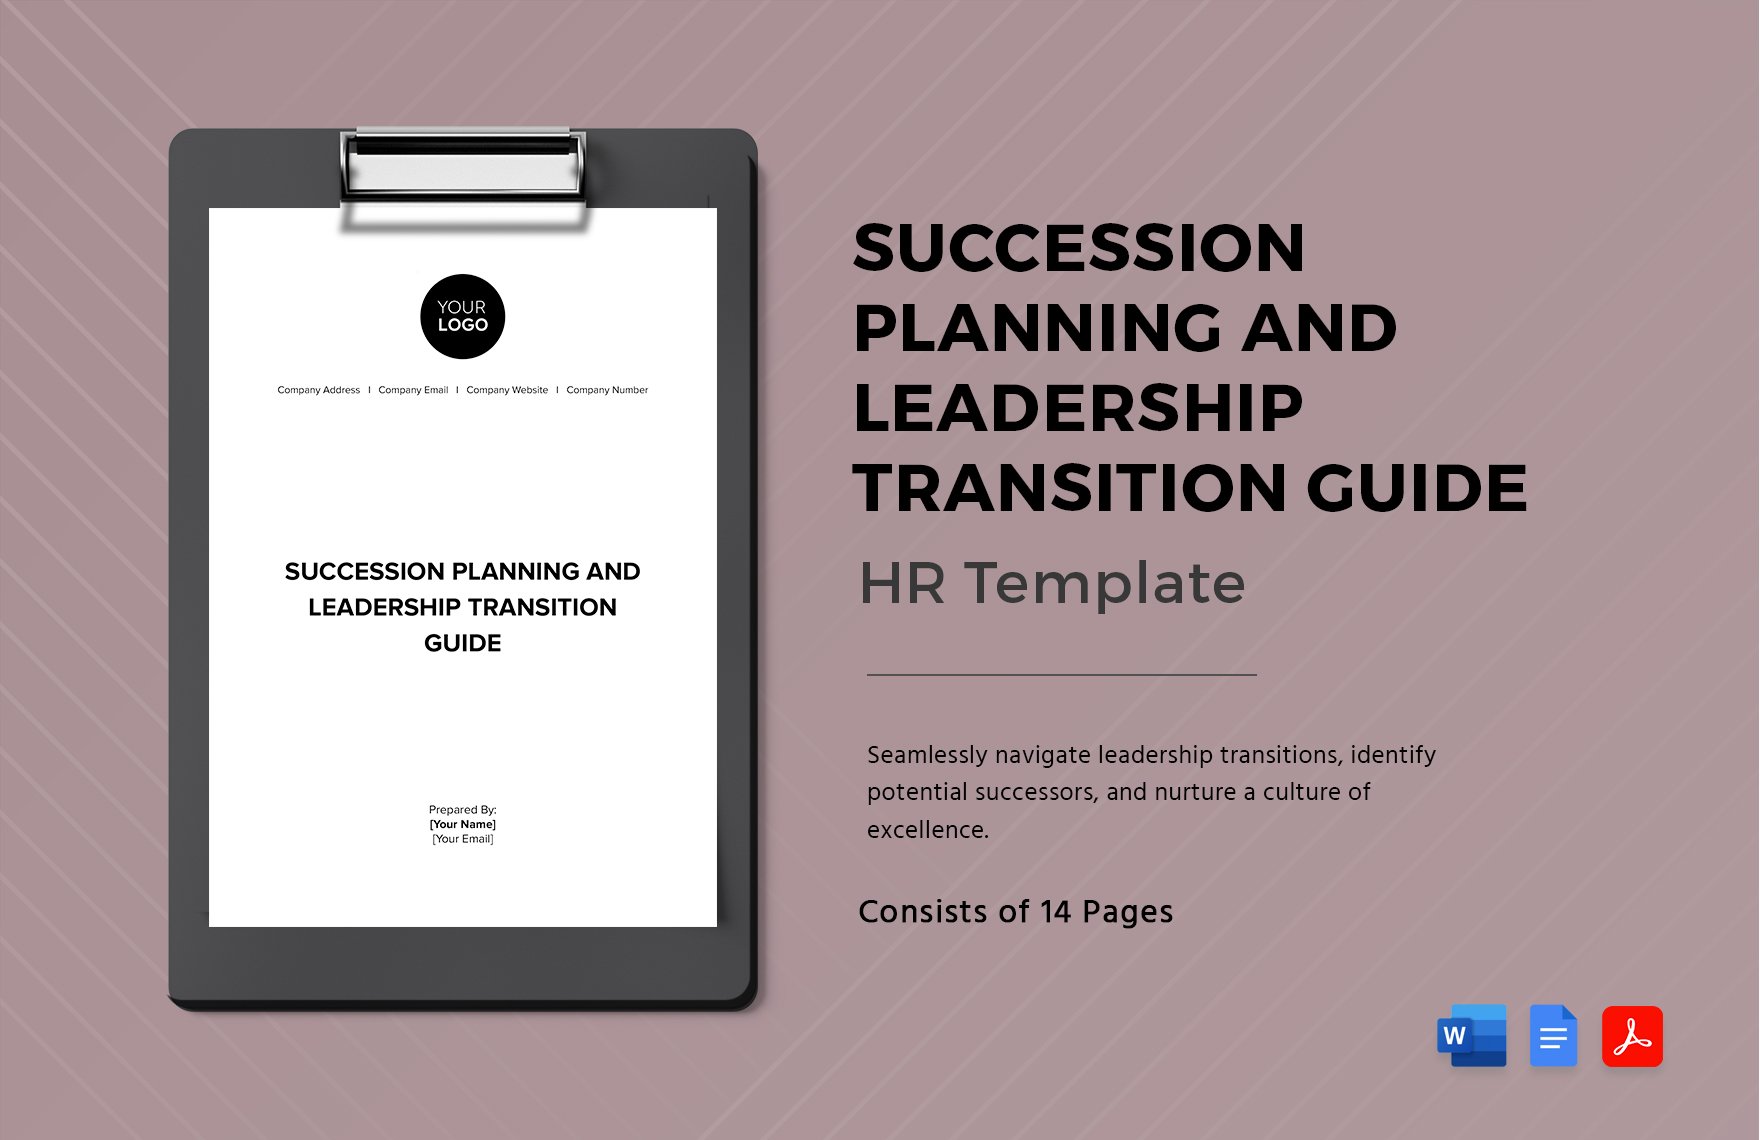 Succession Planning and Leadership Transition Guide HR Template